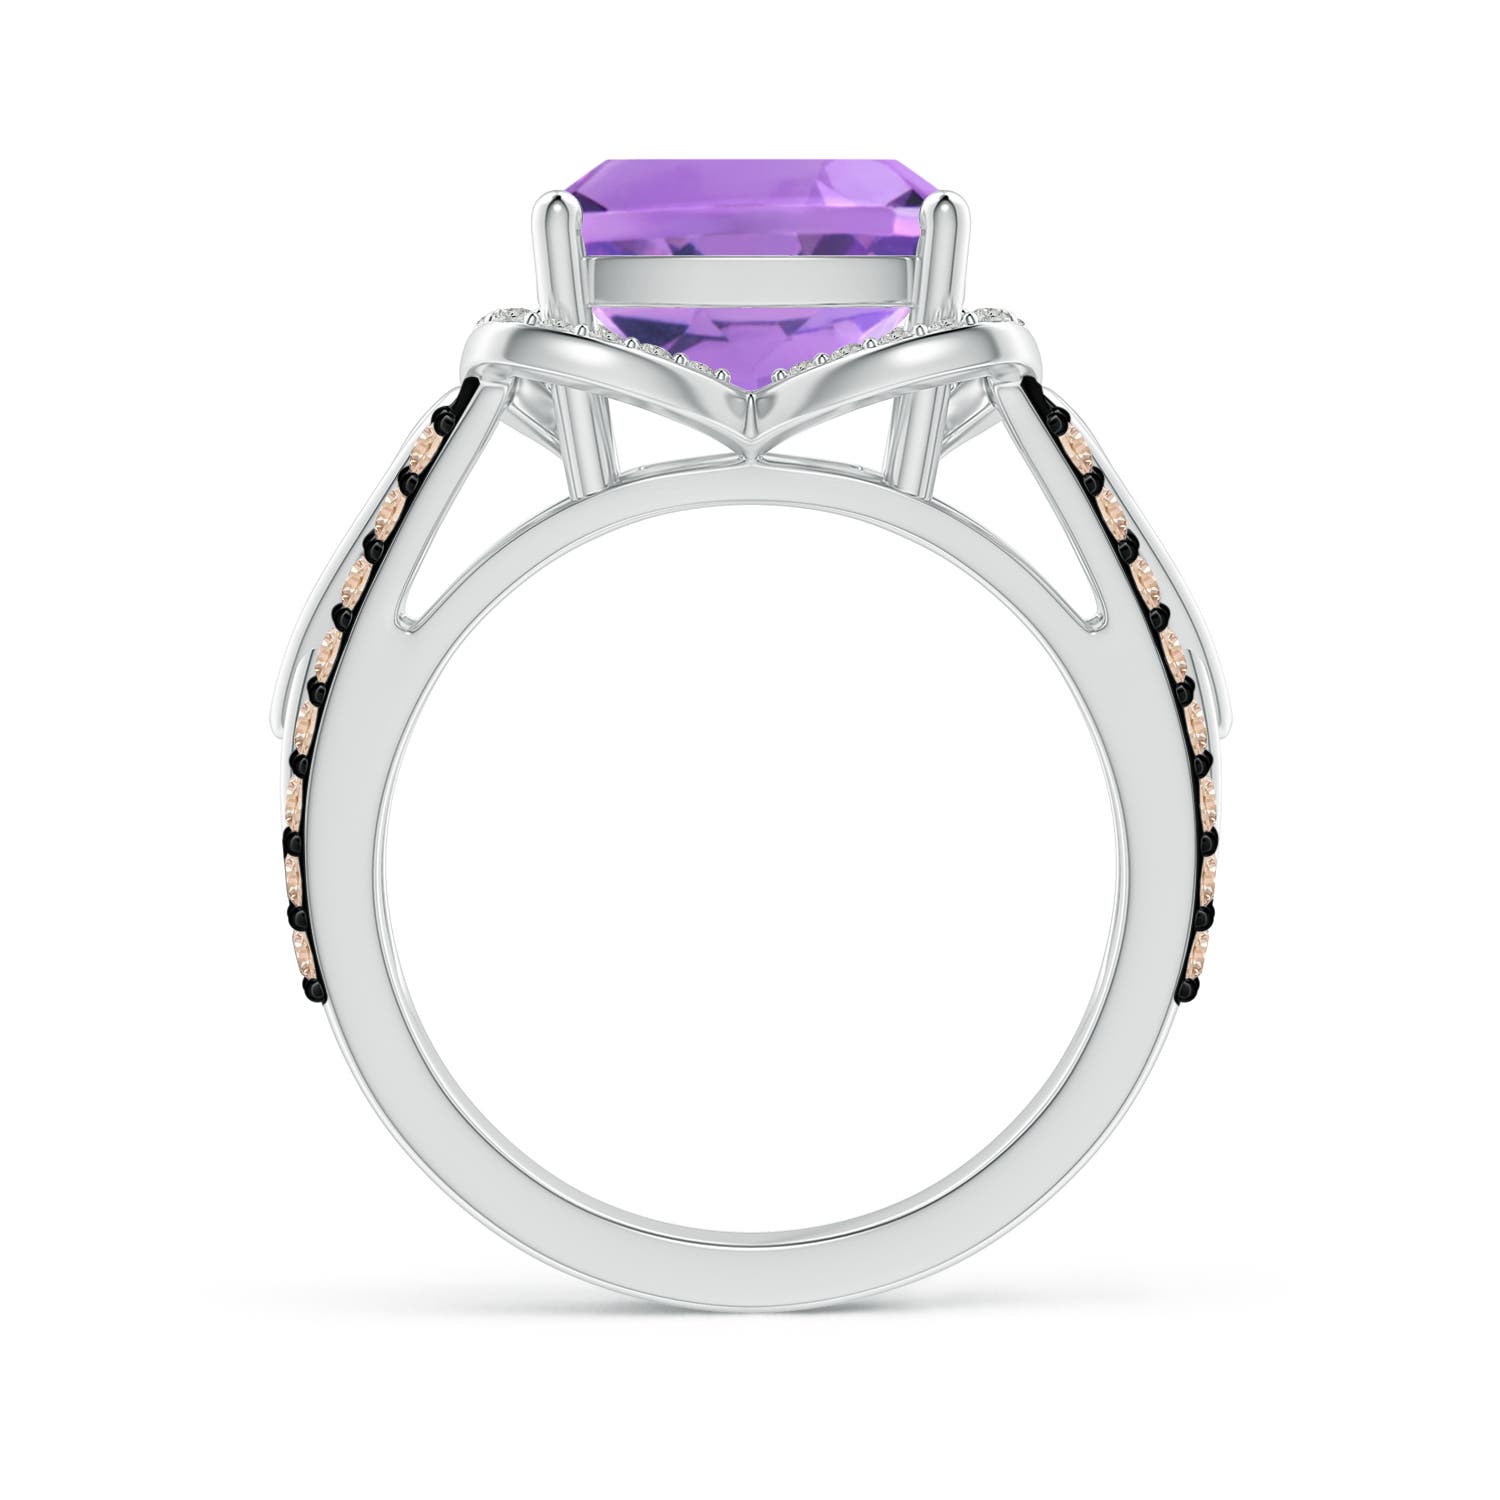 A - Amethyst / 4.41 CT / 14 KT White Gold